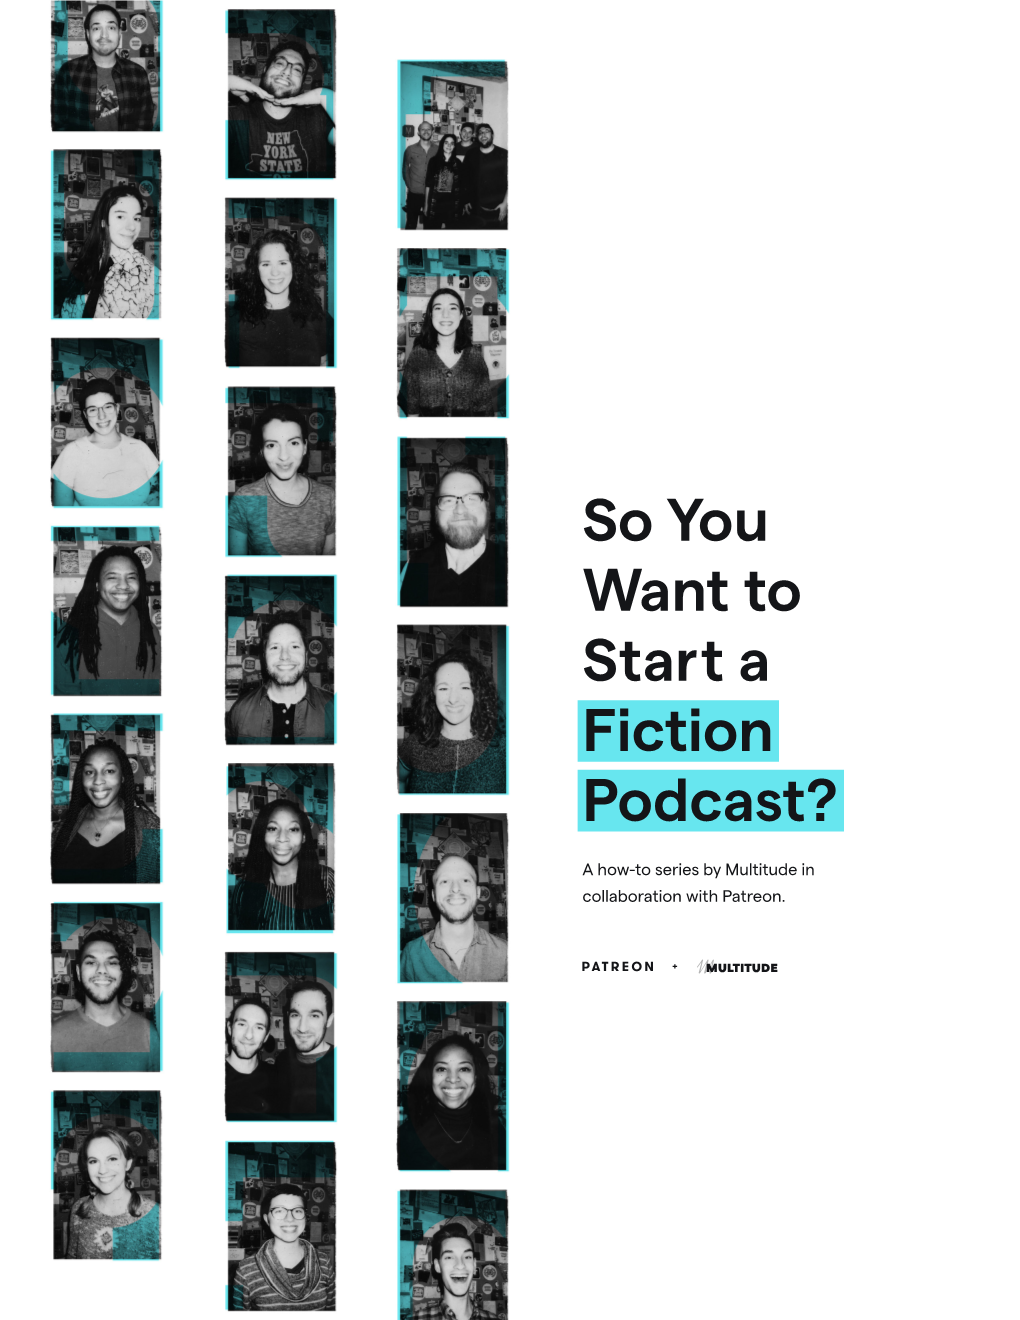 So You Want to Start a Fiction Podcast?